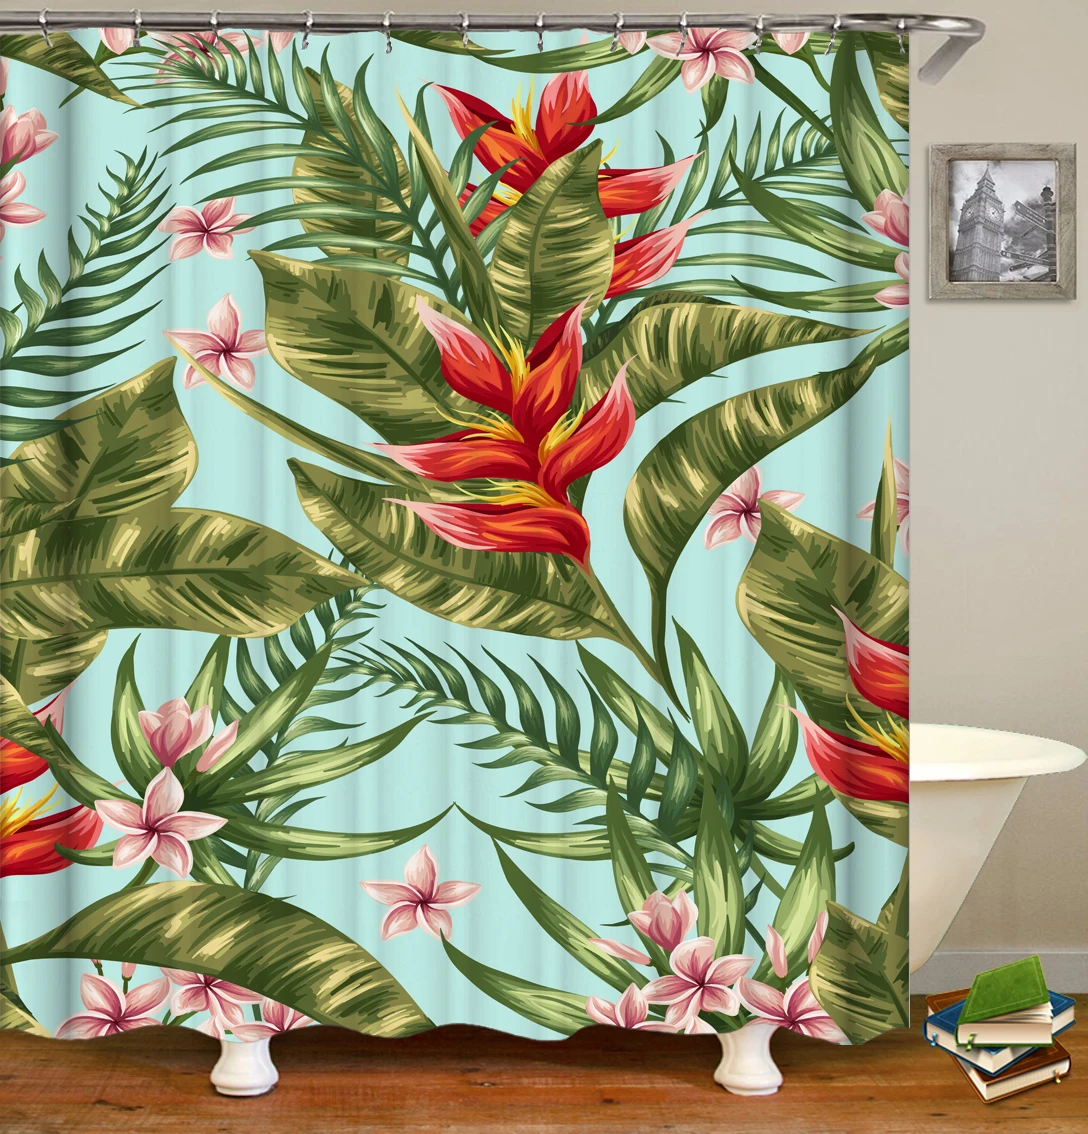 Tropical Jungle Forest Shower Curtain Green Palms Leaves Colorful Flowers  Bathroom Curtain Set With Hooks Waterproof Fabric - Shower Curtains -  AliExpress